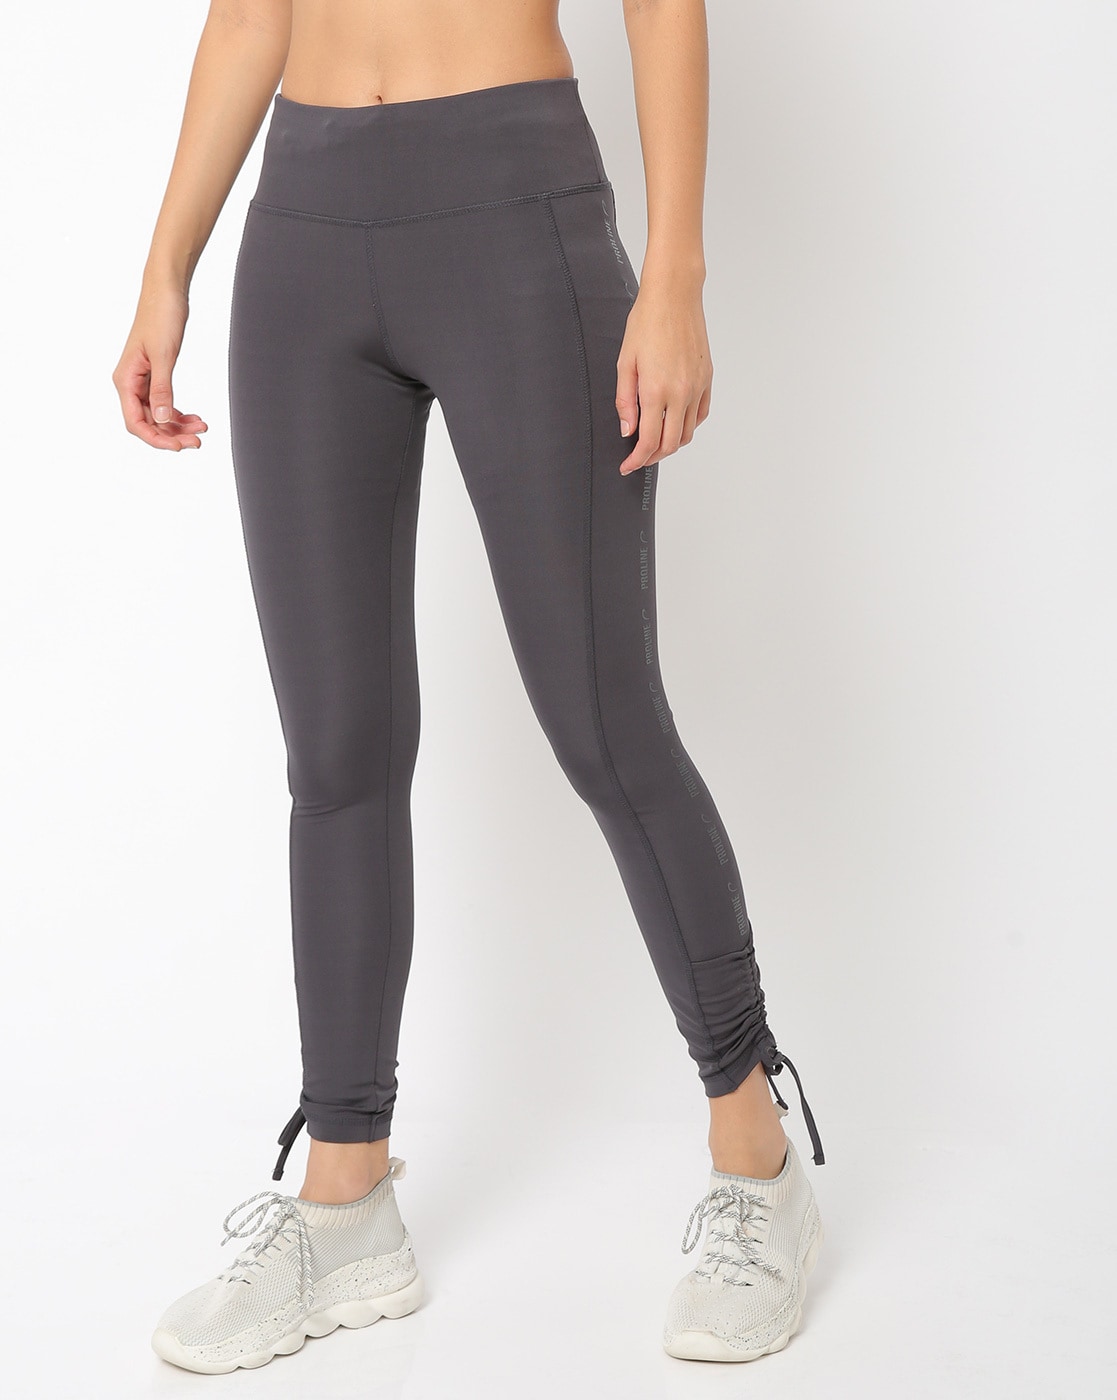 Women's Heather Supplex Workout Tights - Yoga and Running Leggings